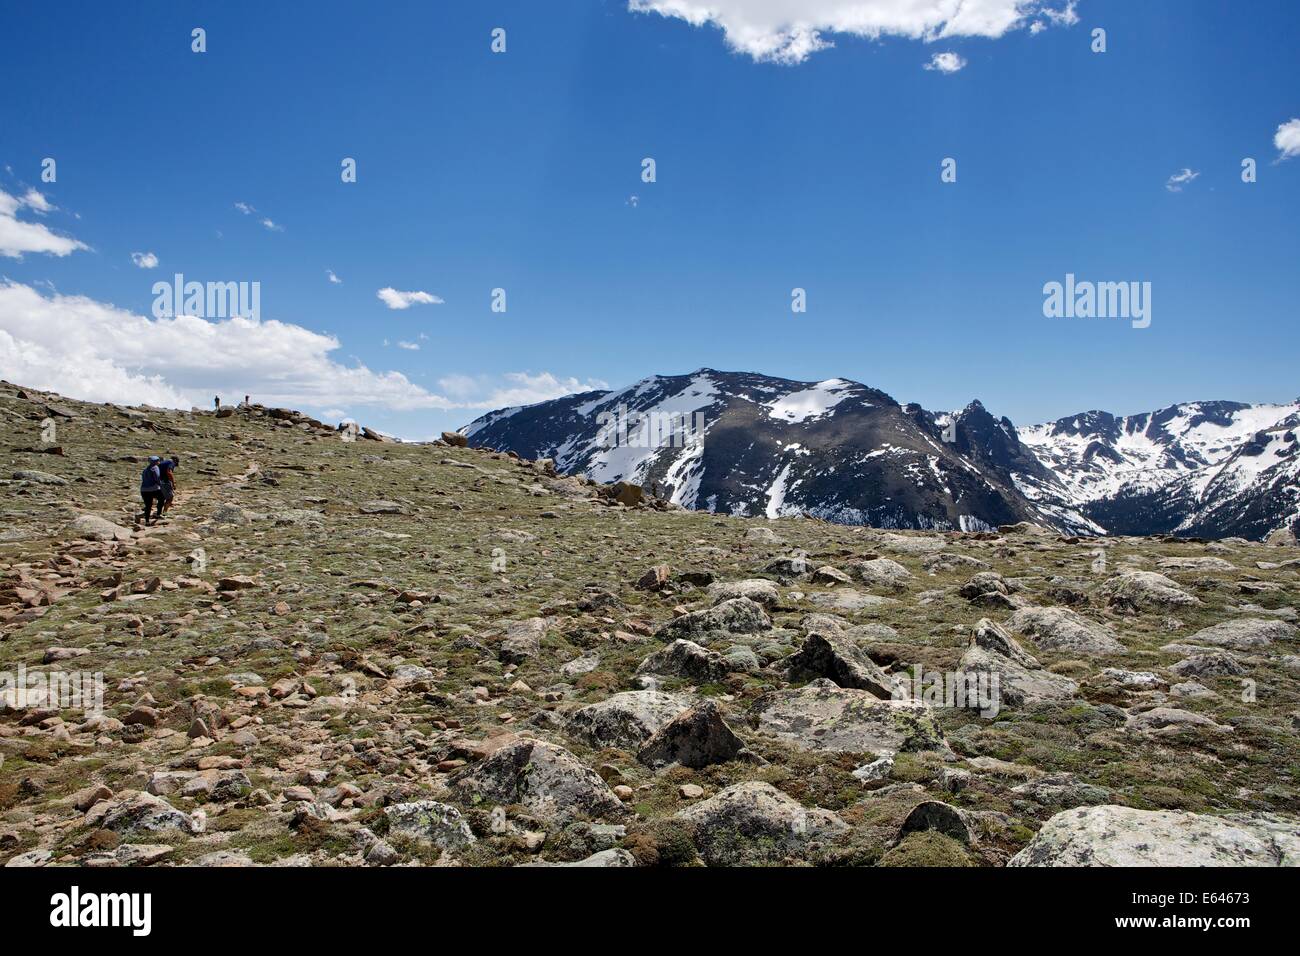 Hiking in Rocky Mountain National Park near the 13,000 foot altitude Stock Photo